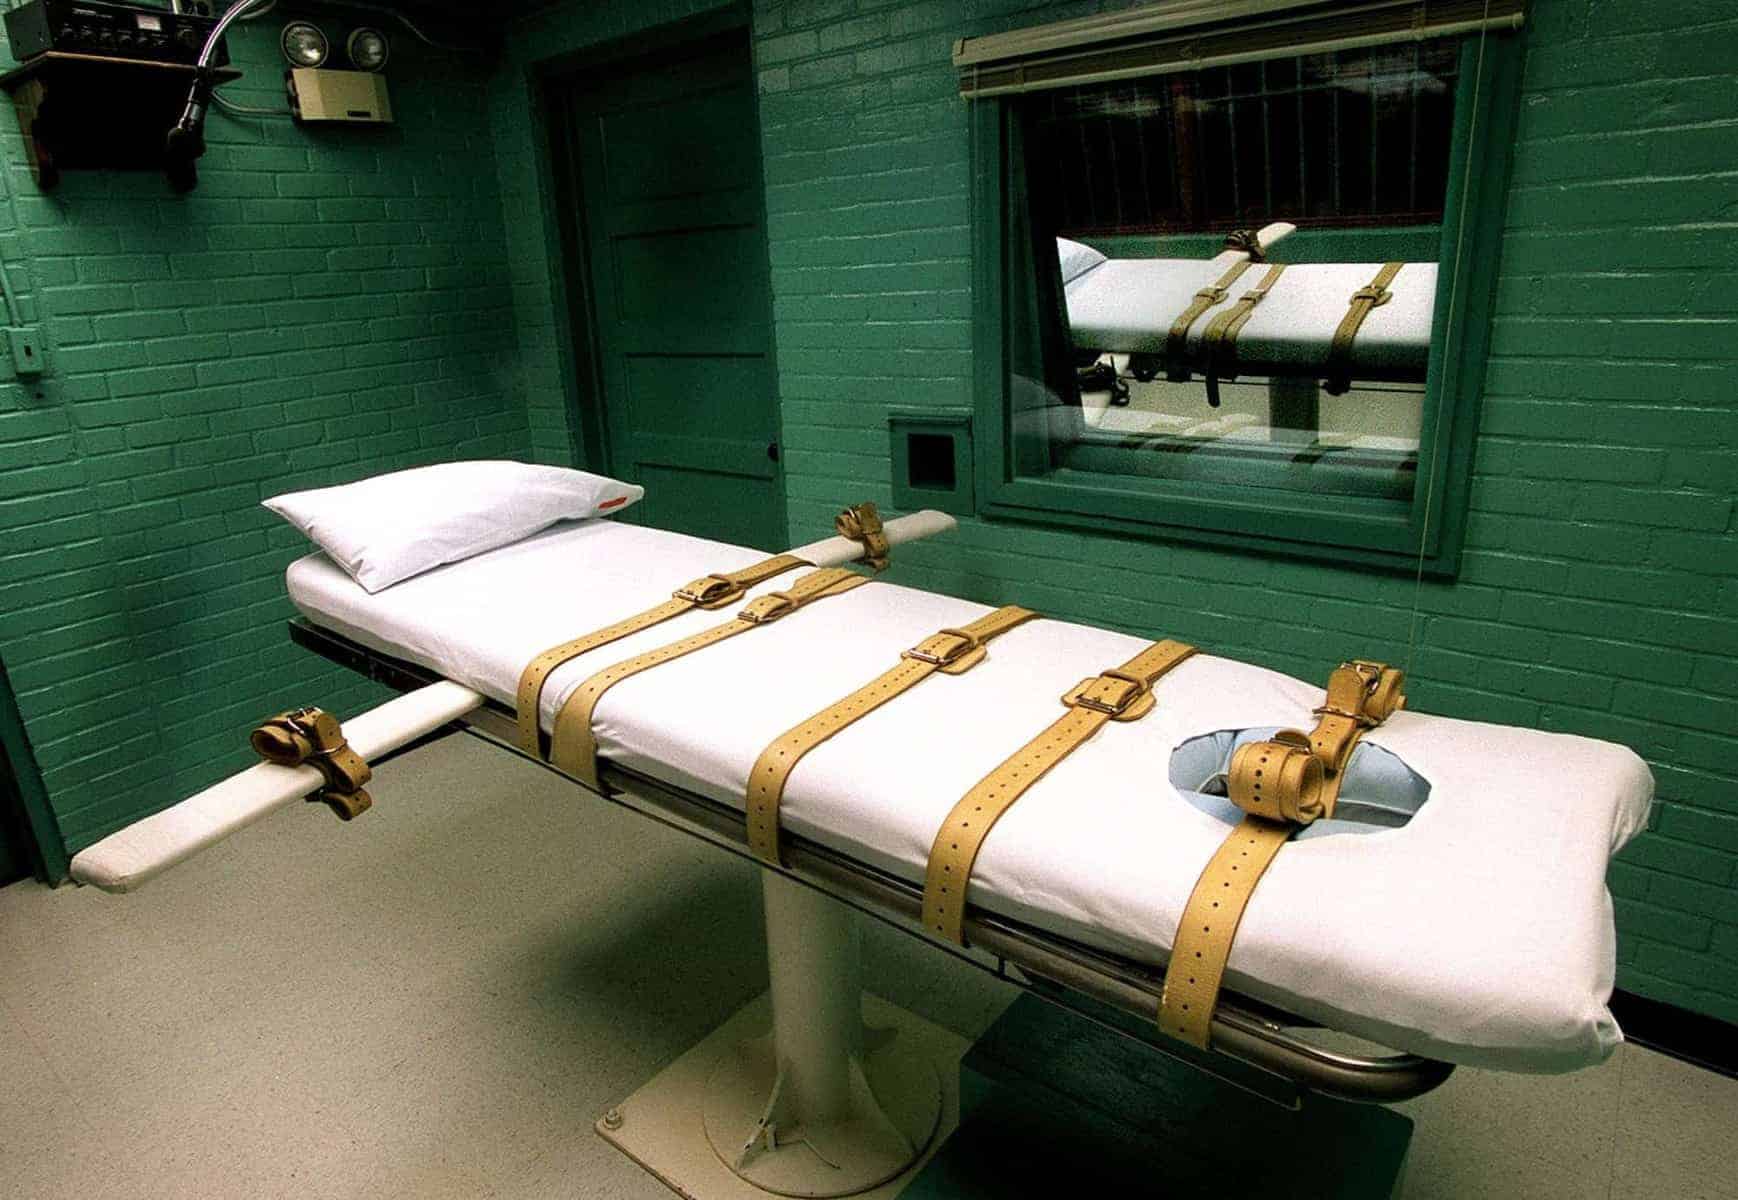 Condemned To Death 5 of America’s Longest Serving Death Row Inmates